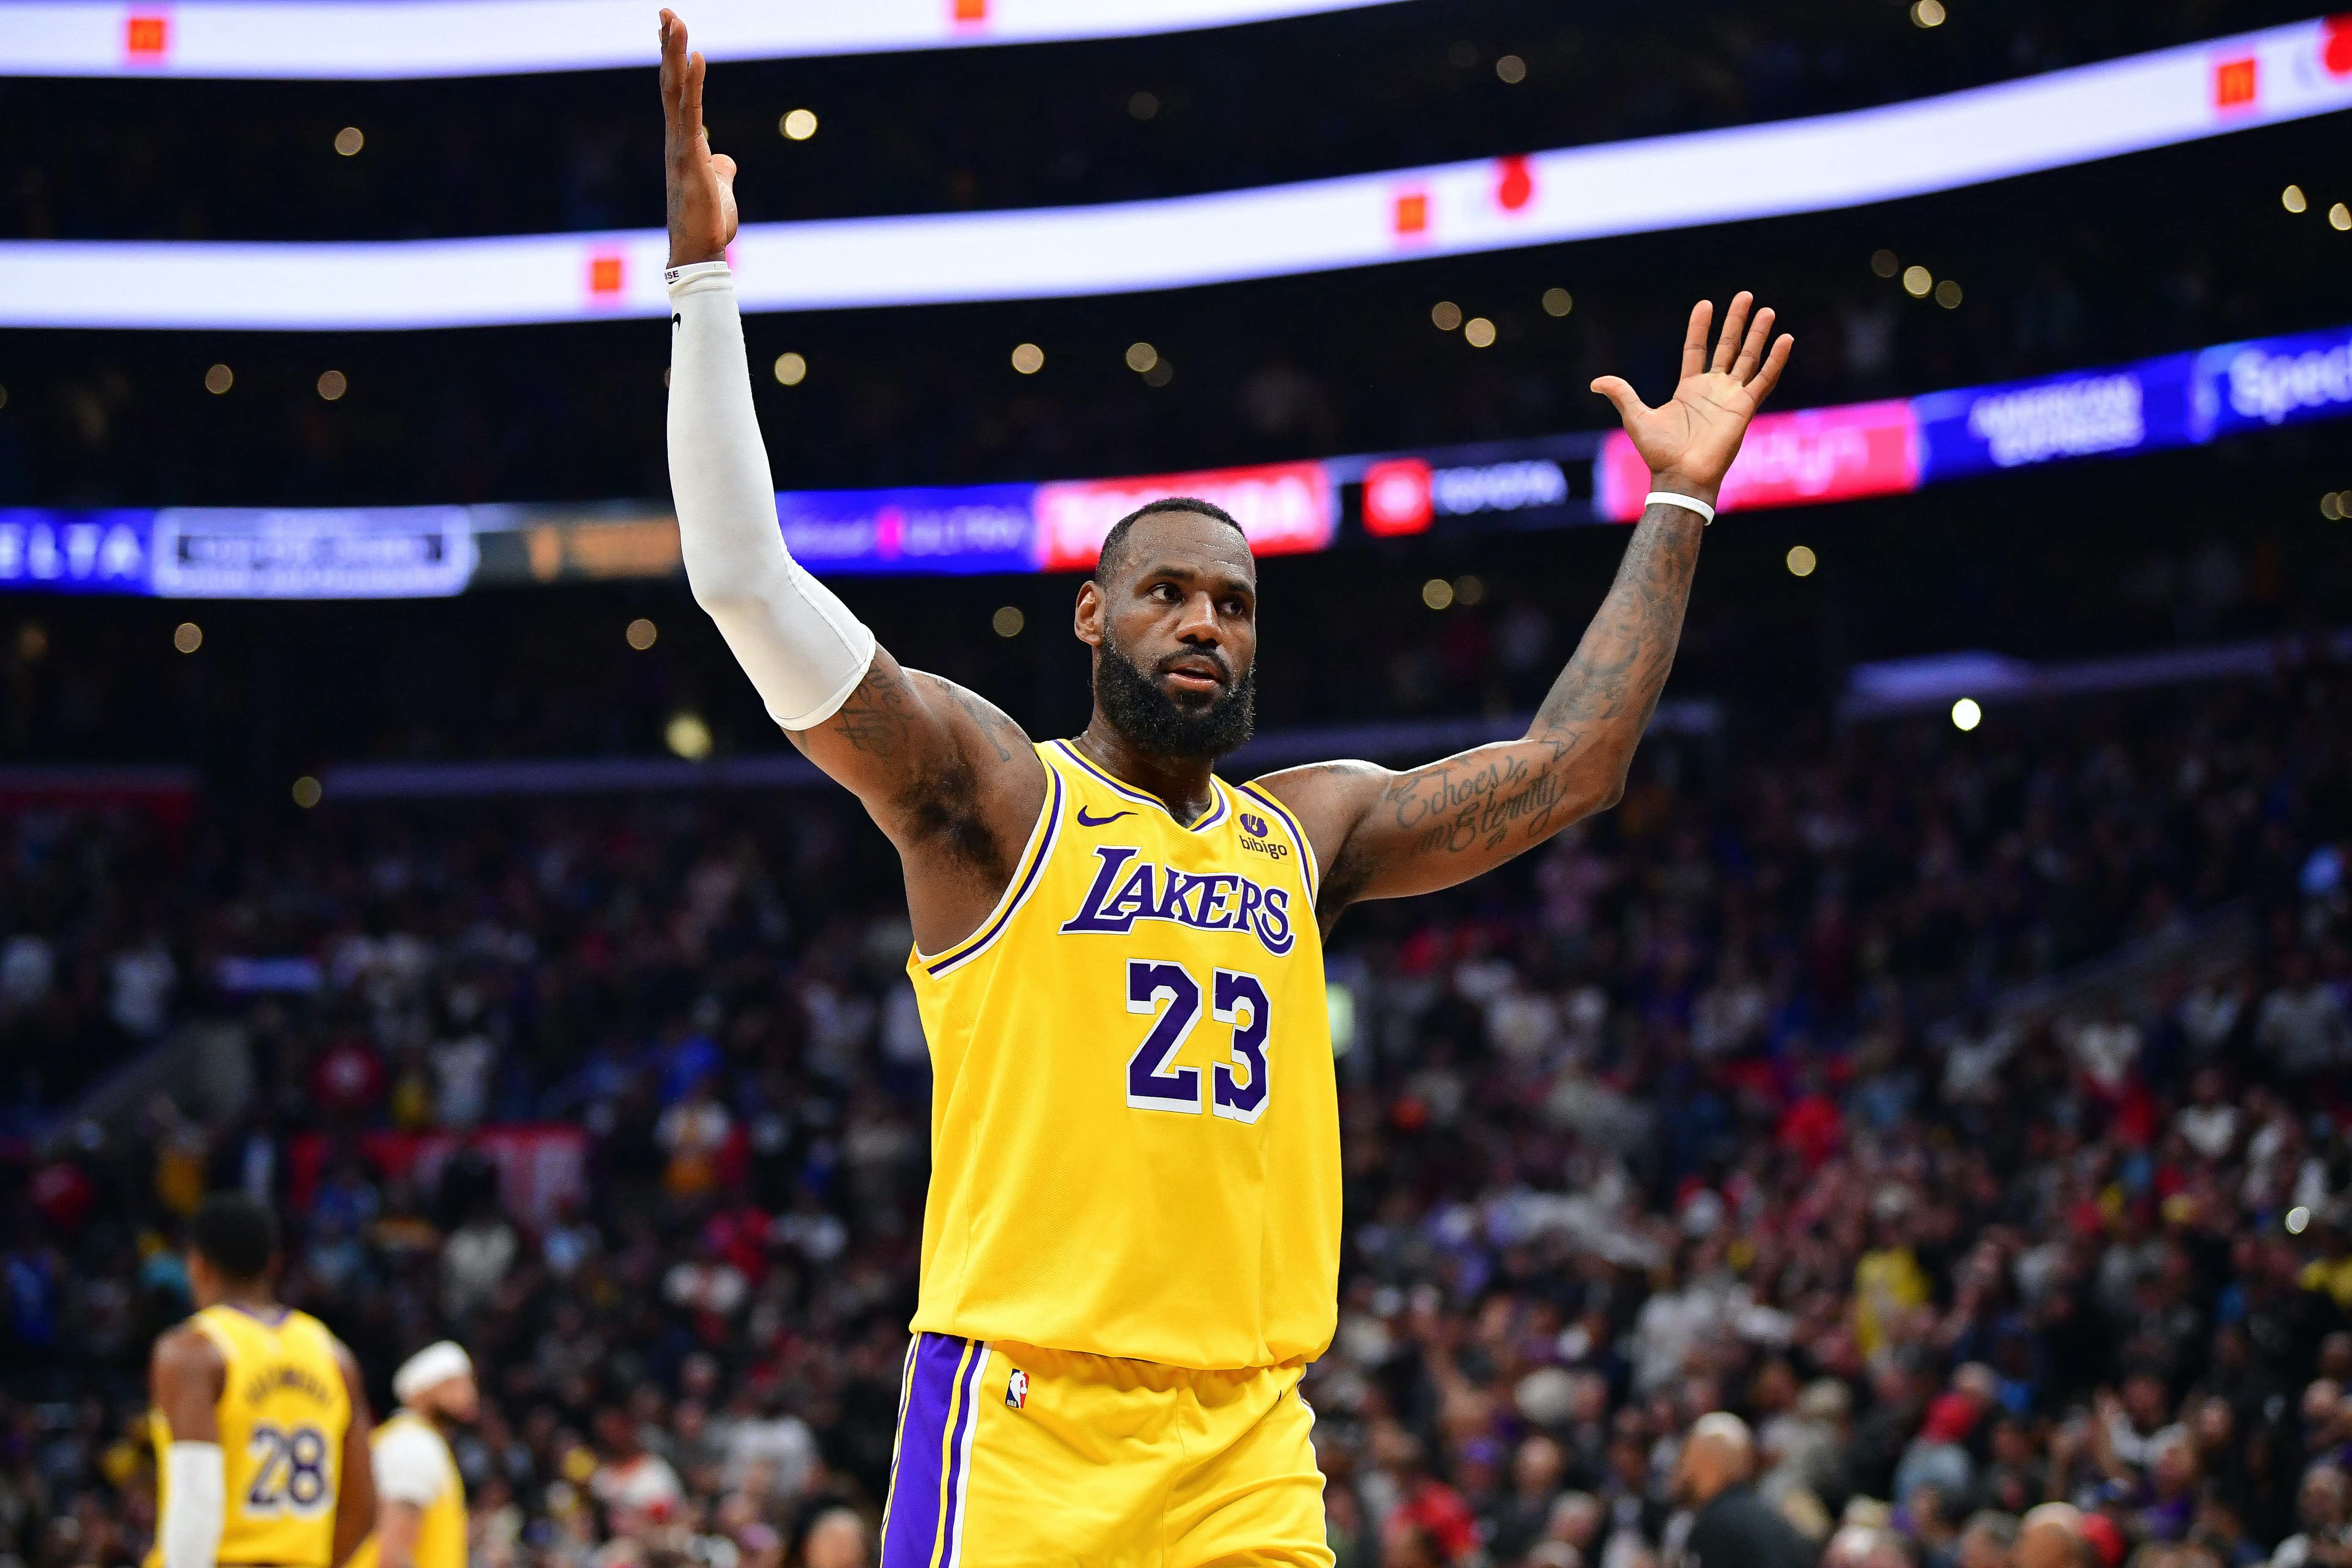 NBA: LeBron James, Lakers stun Clippers with late rally